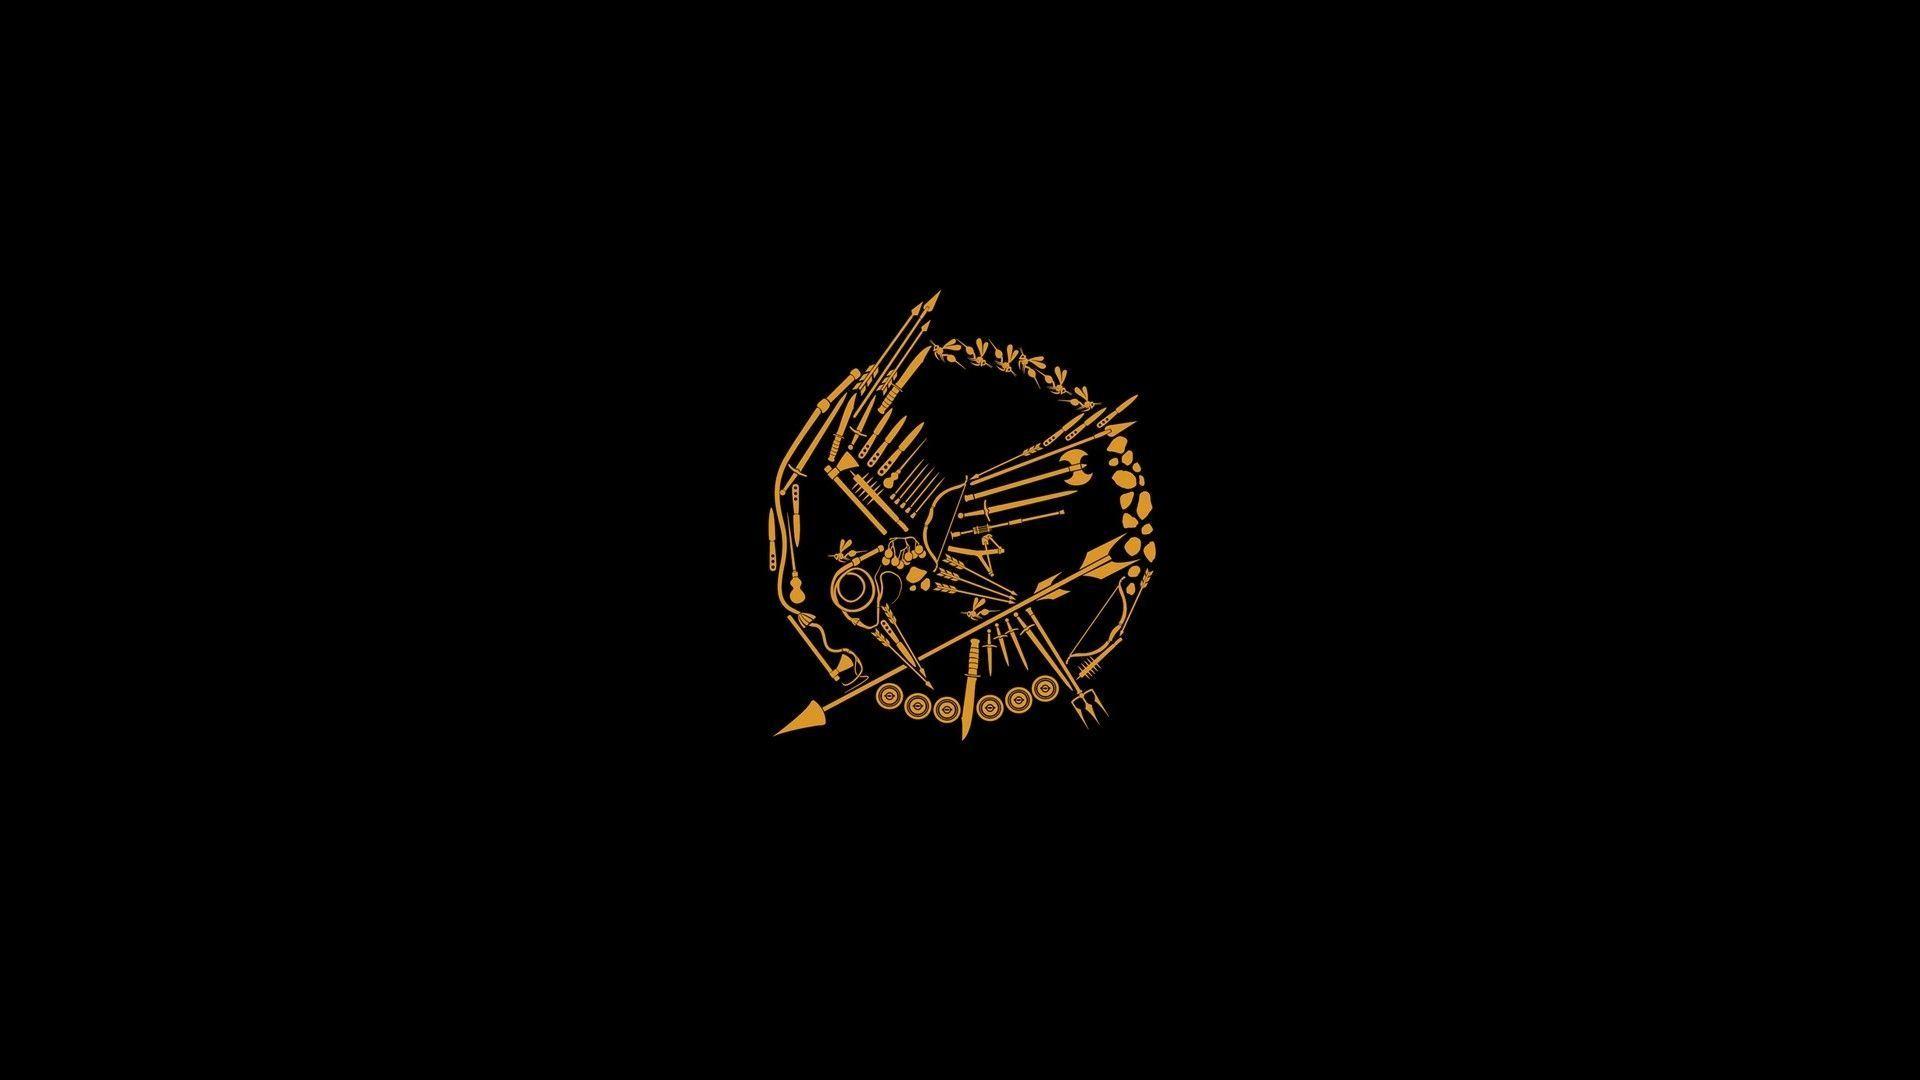 The Hunger Games: Catching Fire Wallpaper. The Hunger Games